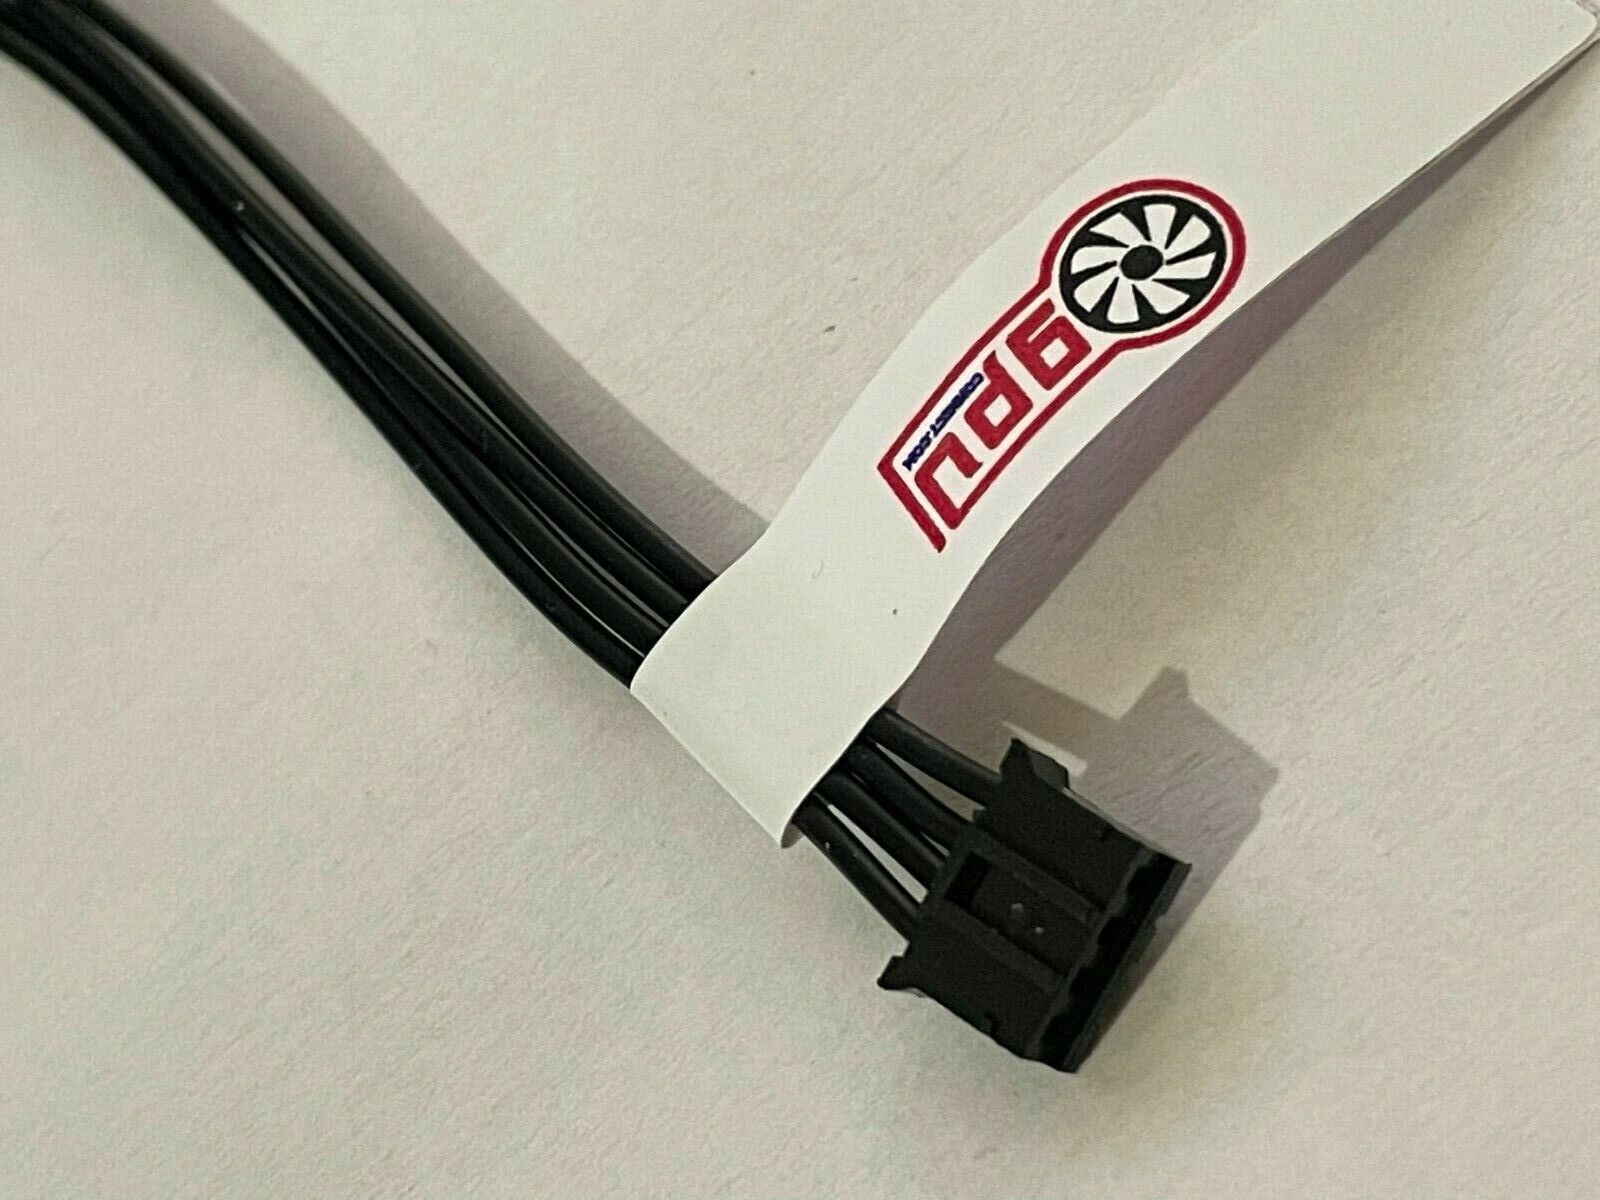 mini 4 Pin PH2.0 EXTENSION Cable for GPU Fan Header 10cm - GPUCONNECT.COM